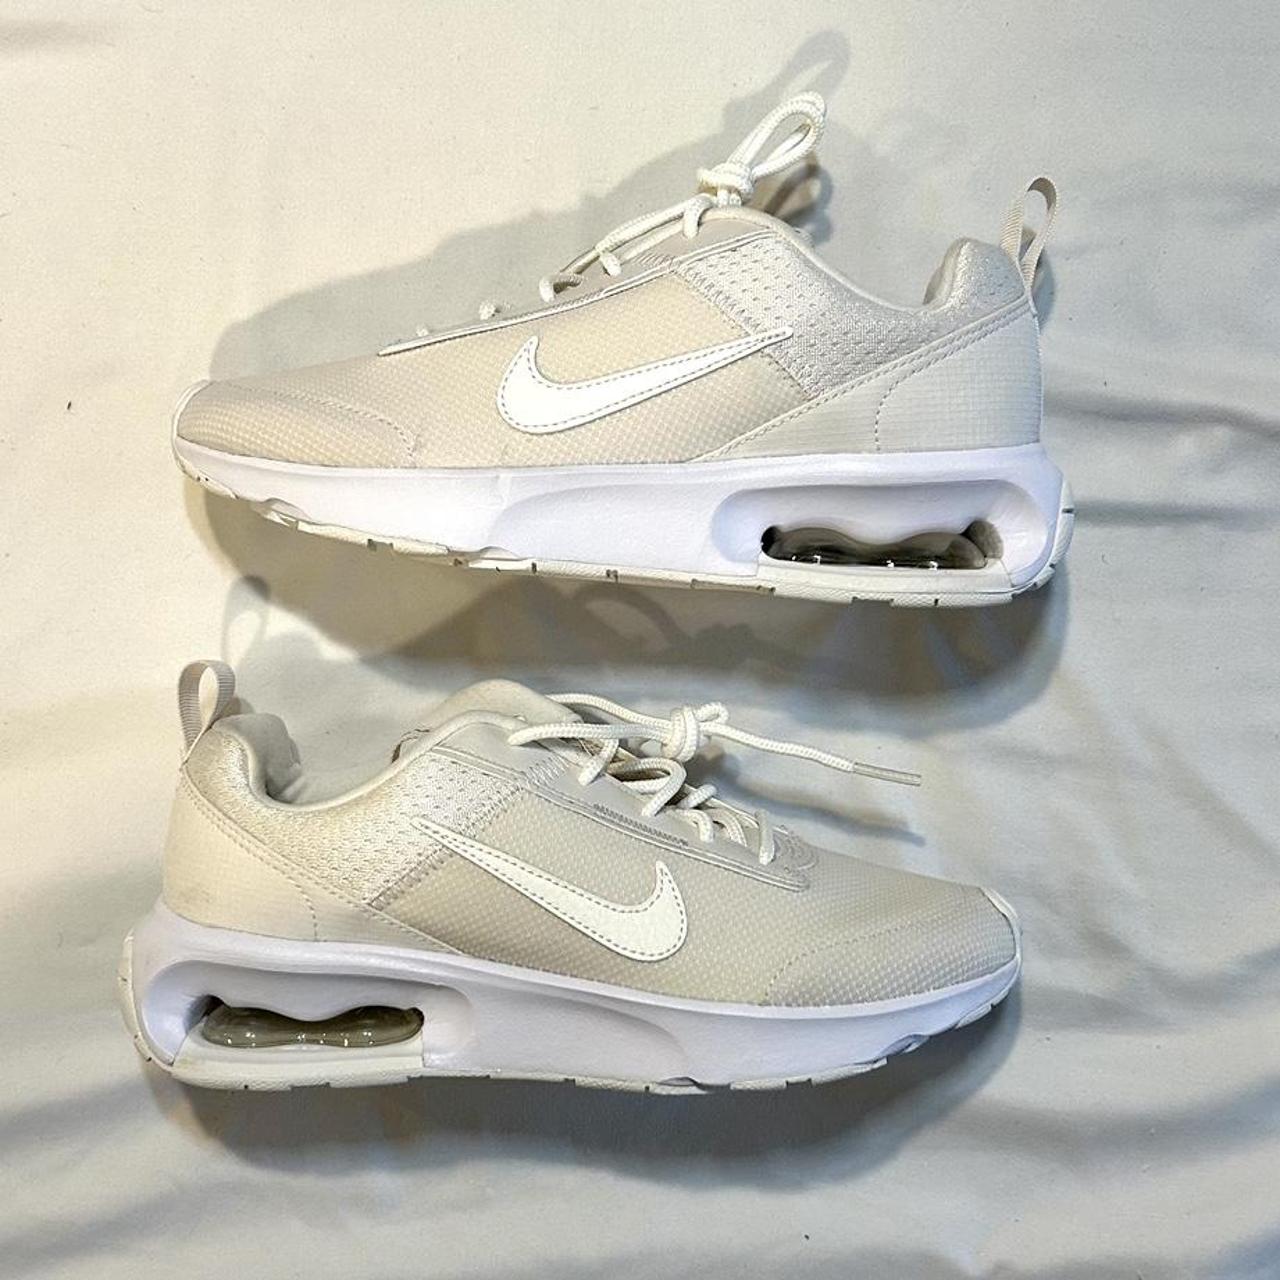 Nike air max sneakers Brand new Size 6.5 - Depop